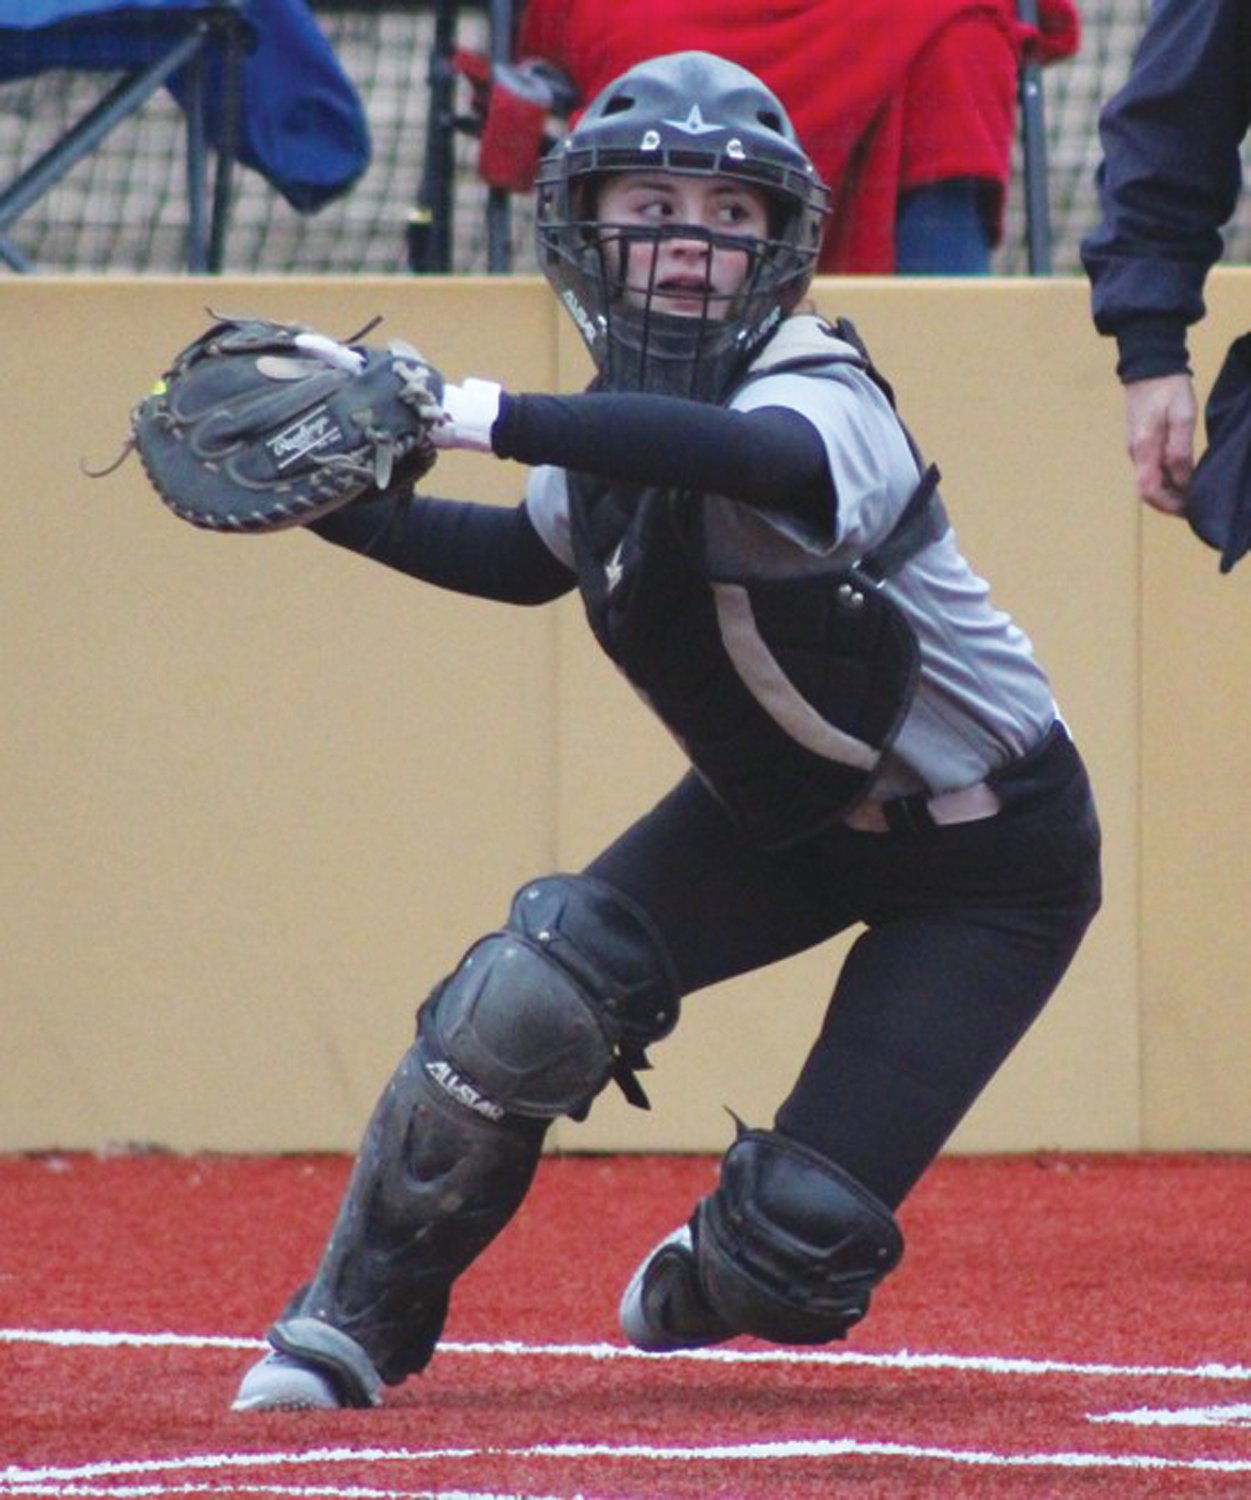 ‘SHE’S OUR ROCK’: Pilgrim catcher Genna D’Amato works behind the plate.